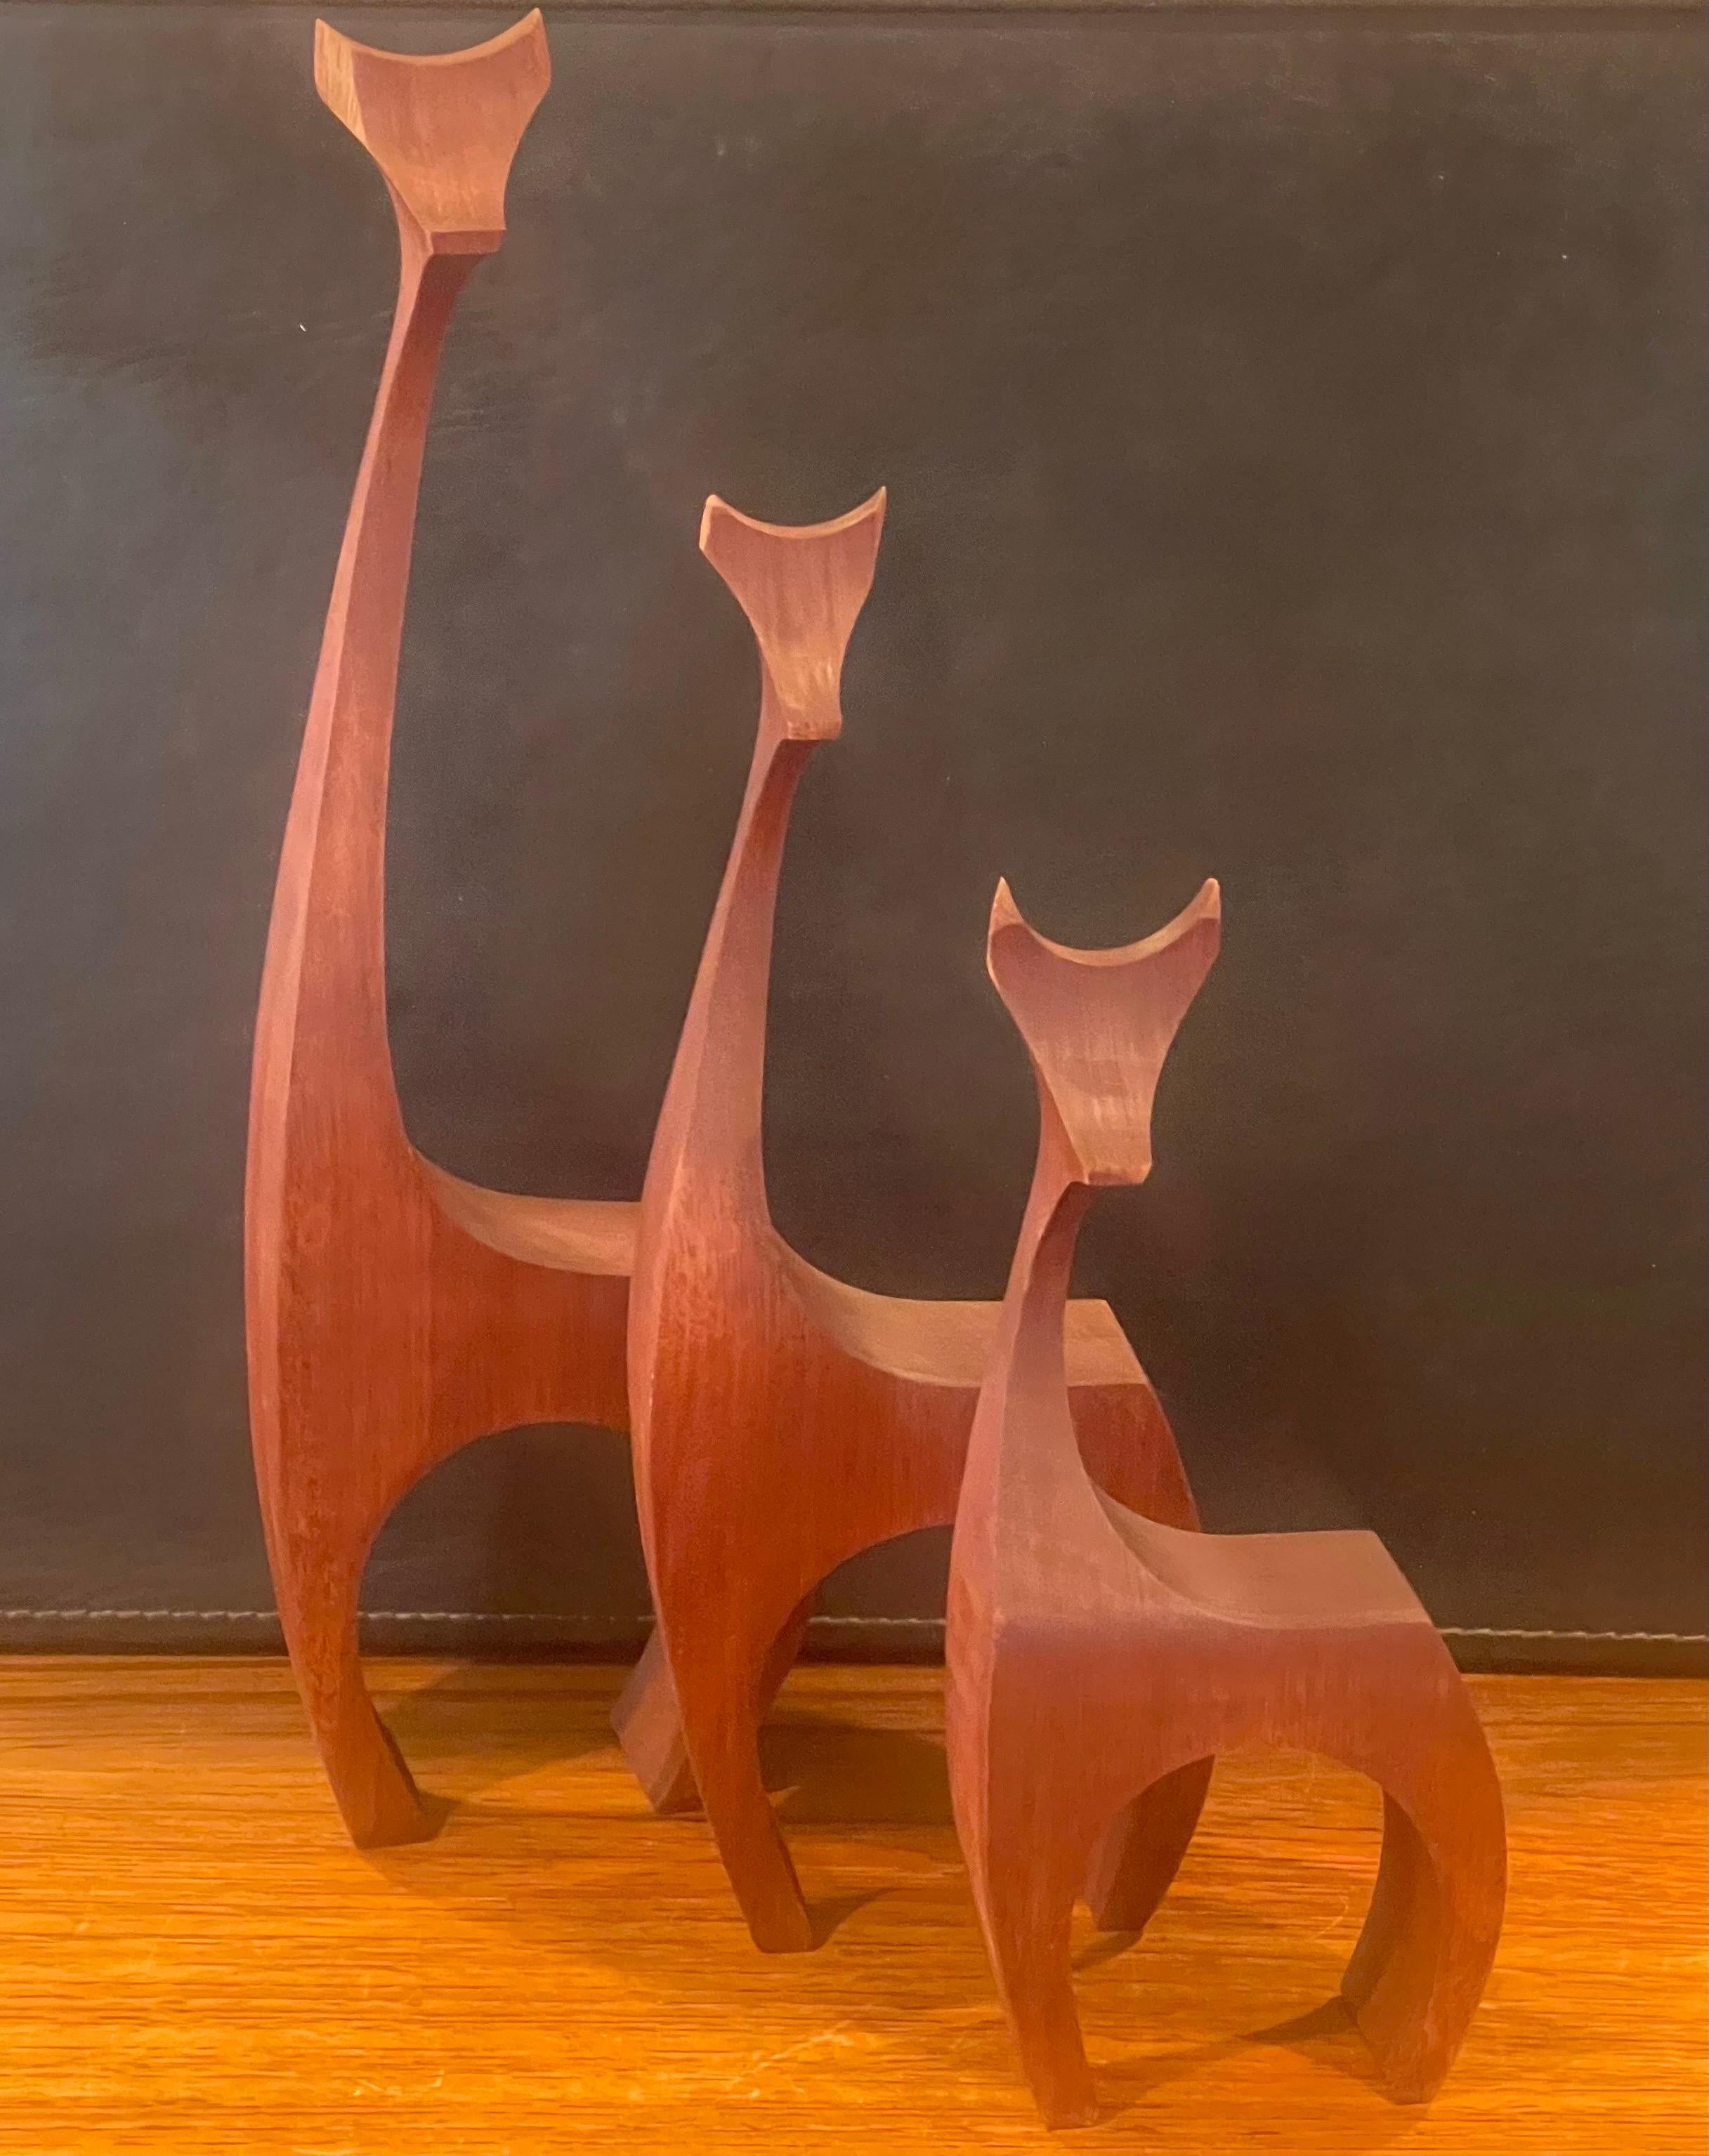 Hand-Carved Set of Three Modernist Giraffe Wood Sculptures by Del Zotto Studios For Sale